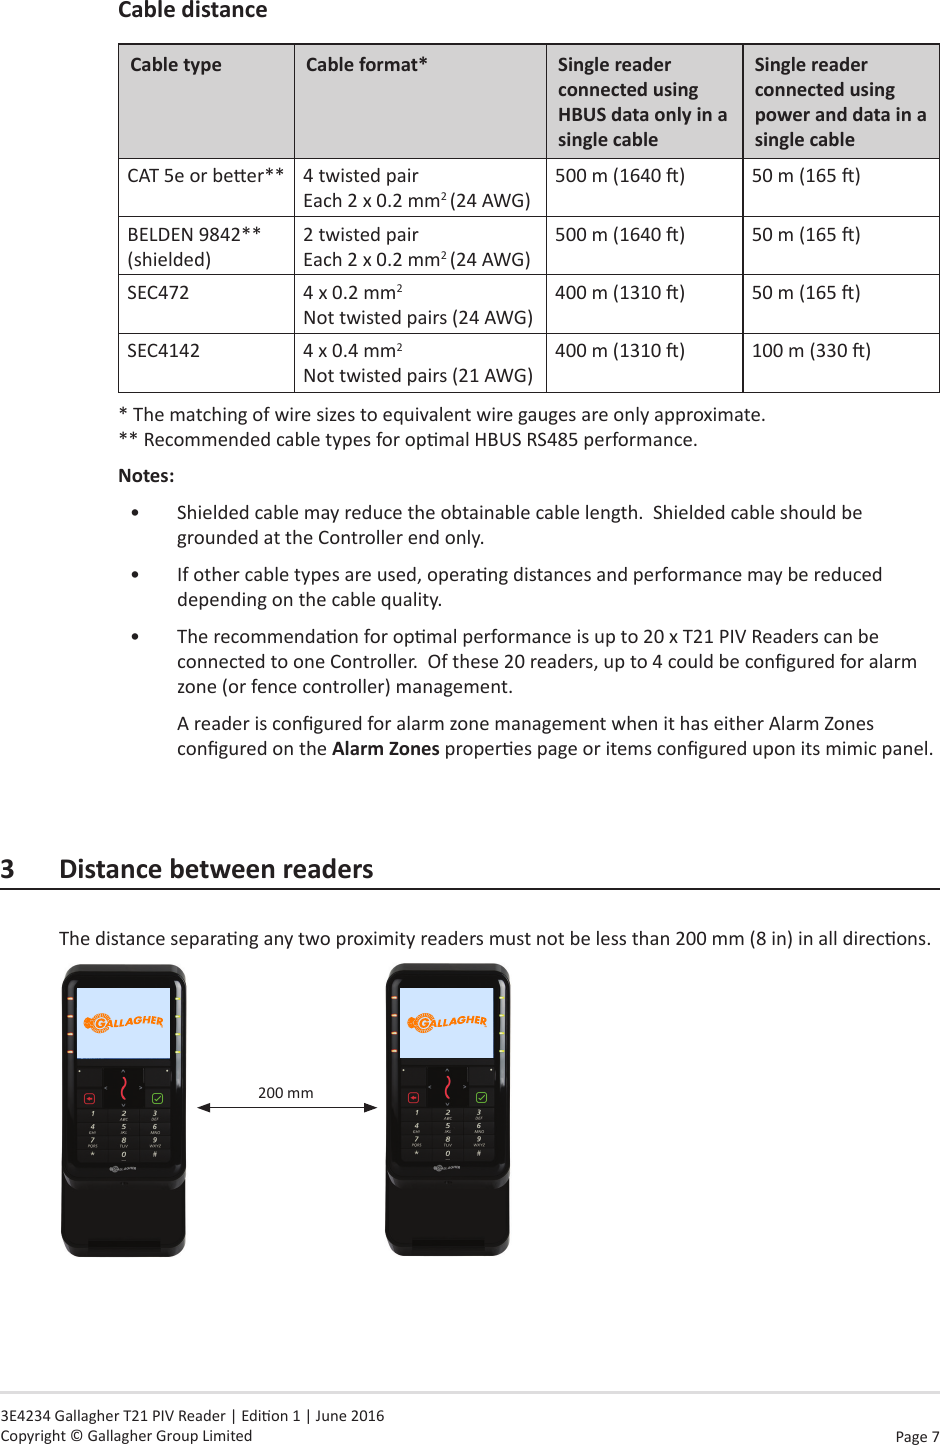 Page  7   3E4234 Gallagher T21 PIV Reader | Edion 1 | June 2016 Copyright © Gallagher Group LimitedCable distanceCable type Cable format* Single reader connected using HBUS data only in a single cableSingle reader connected using  power and data in a single cableCAT 5e or beer** 4 twisted pair Each 2 x 0.2 mm2 (24 AWG)500 m (1640 ) 50 m (165 )BELDEN 9842** (shielded)2 twisted pair Each 2 x 0.2 mm2 (24 AWG)500 m (1640 ) 50 m (165 )SEC472 4 x 0.2 mm2 Not twisted pairs (24 AWG)400 m (1310 ) 50 m (165 )SEC4142 4 x 0.4 mm2 Not twisted pairs (21 AWG)400 m (1310 ) 100 m (330 )* The matching of wire sizes to equivalent wire gauges are only approximate. ** Recommended cable types for opmal HBUS RS485 performance.Notes:•  Shielded cable may reduce the obtainable cable length.  Shielded cable should be grounded at the Controller end only.  •  If other cable types are used, operang distances and performance may be reduced depending on the cable quality.•  The recommendaon for opmal performance is up to 20 x T21 PIV Readers can be connected to one Controller.  Of these 20 readers, up to 4 could be congured for alarm zone (or fence controller) management.A reader is congured for alarm zone management when it has either Alarm Zones congured on the Alarm Zones properes page or items congured upon its mimic panel.3  Distance between readersThe distance separang any two proximity readers must not be less than 200 mm (8 in) in all direcons.200 mm